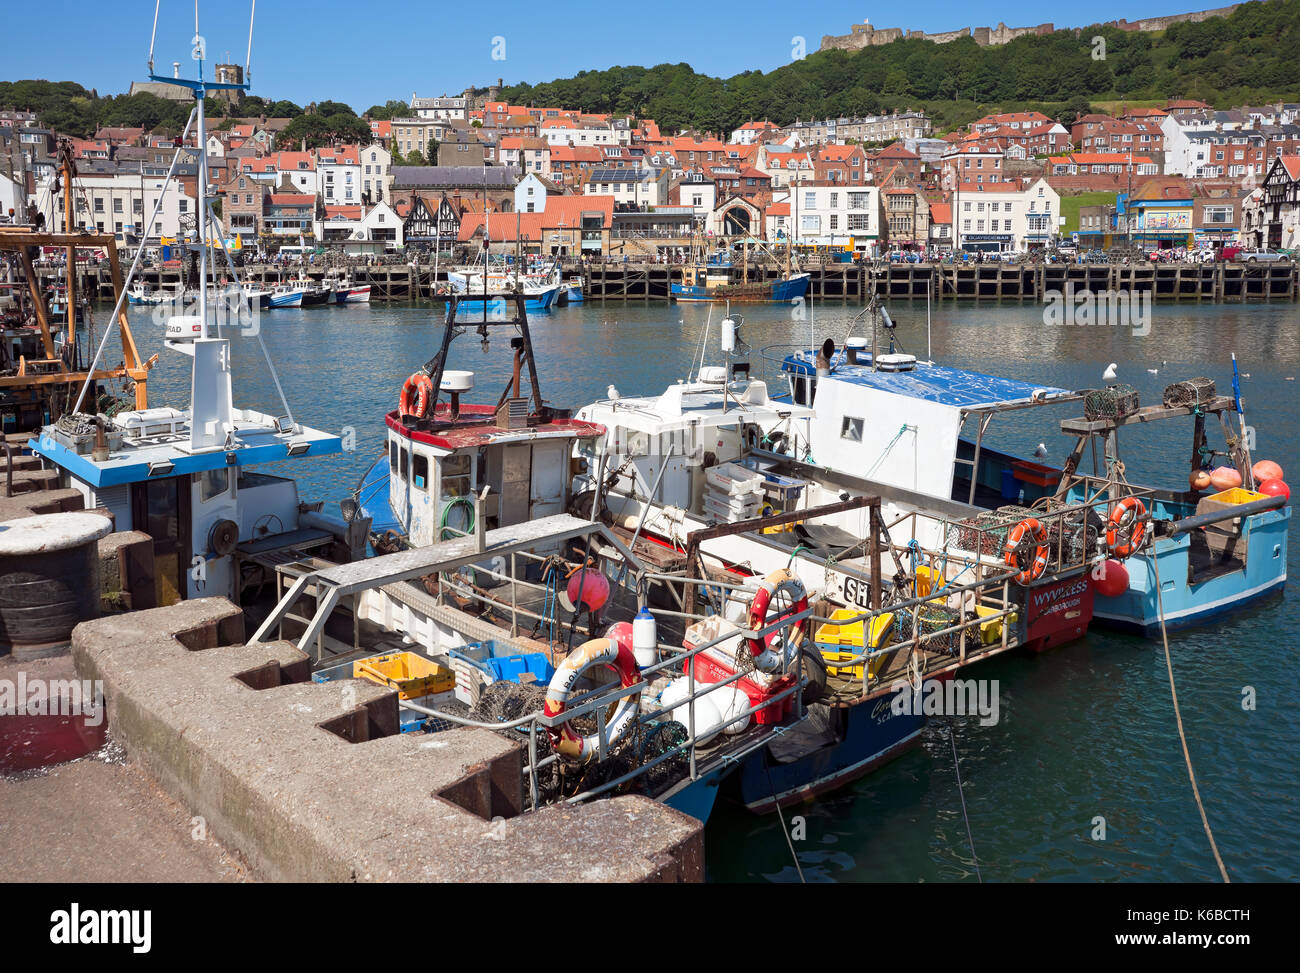 Fishing boats boat moored in the harbour in summer Scarborough North Yorkshire England UK United Kingdom GB Great Britain Stock Photo